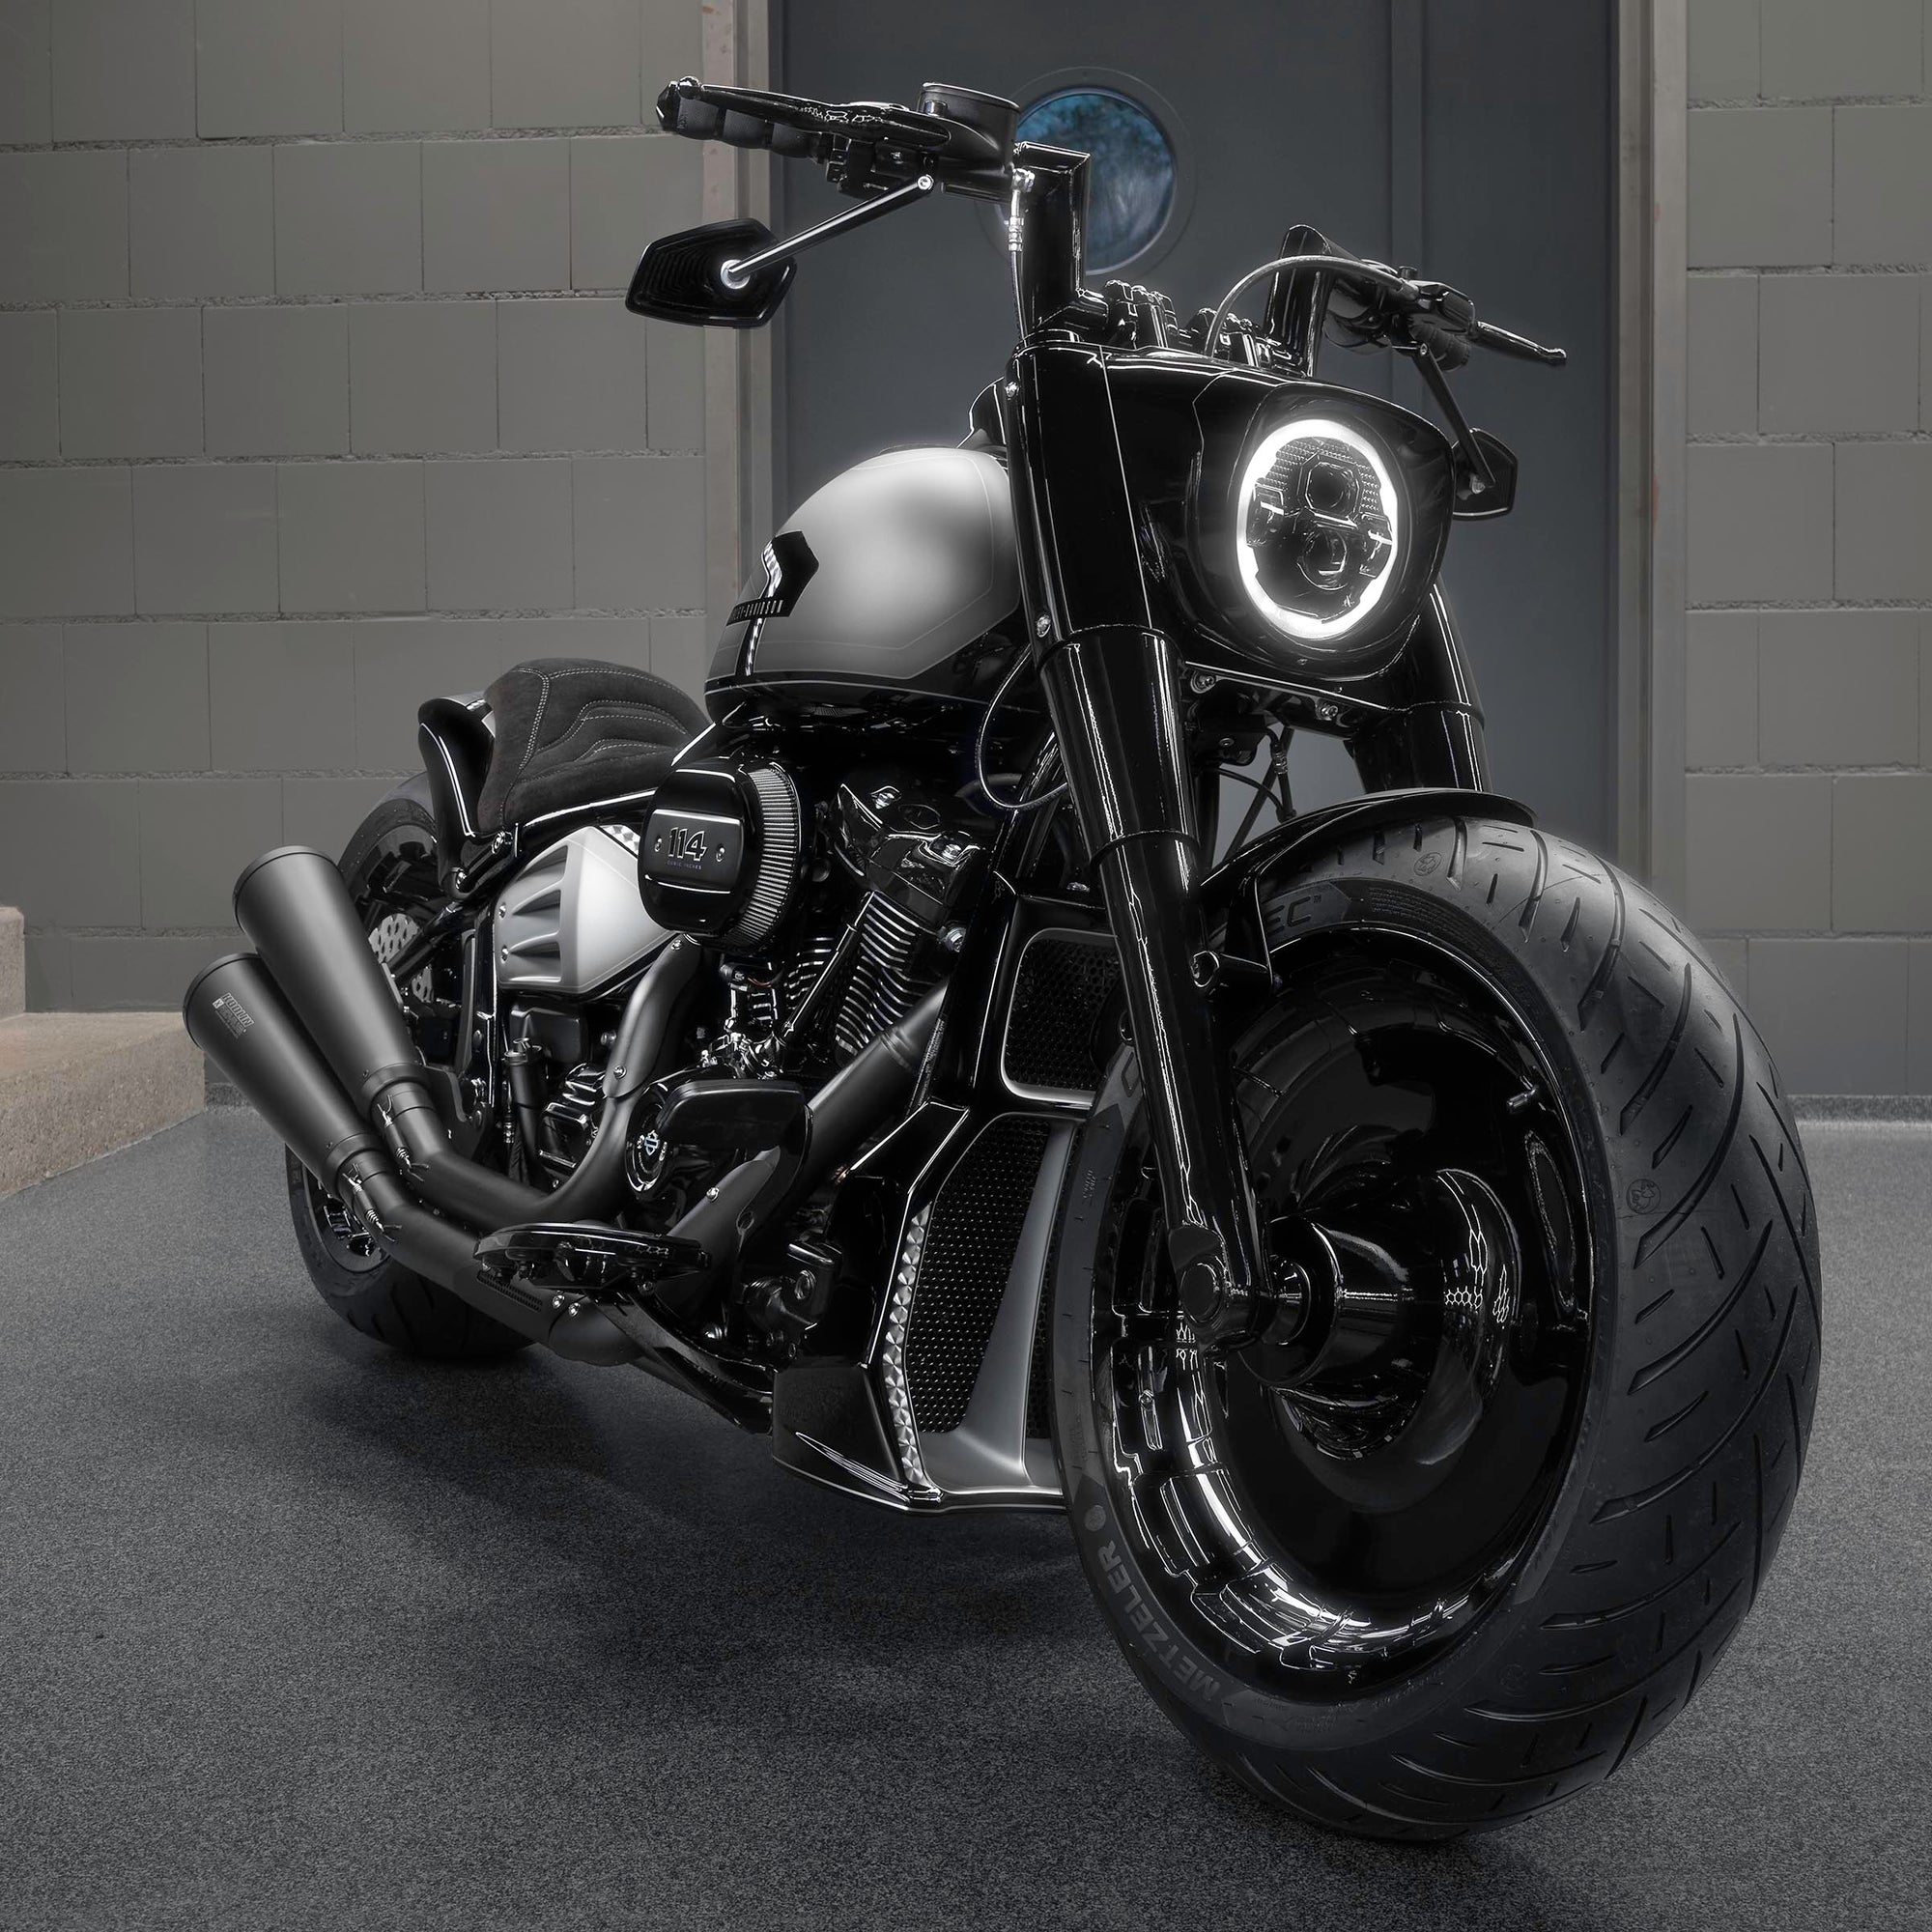 Modified Harley Davidson Softail Fat Boy  motorcycle with Killer Custom parts from the front in a modern bike shop